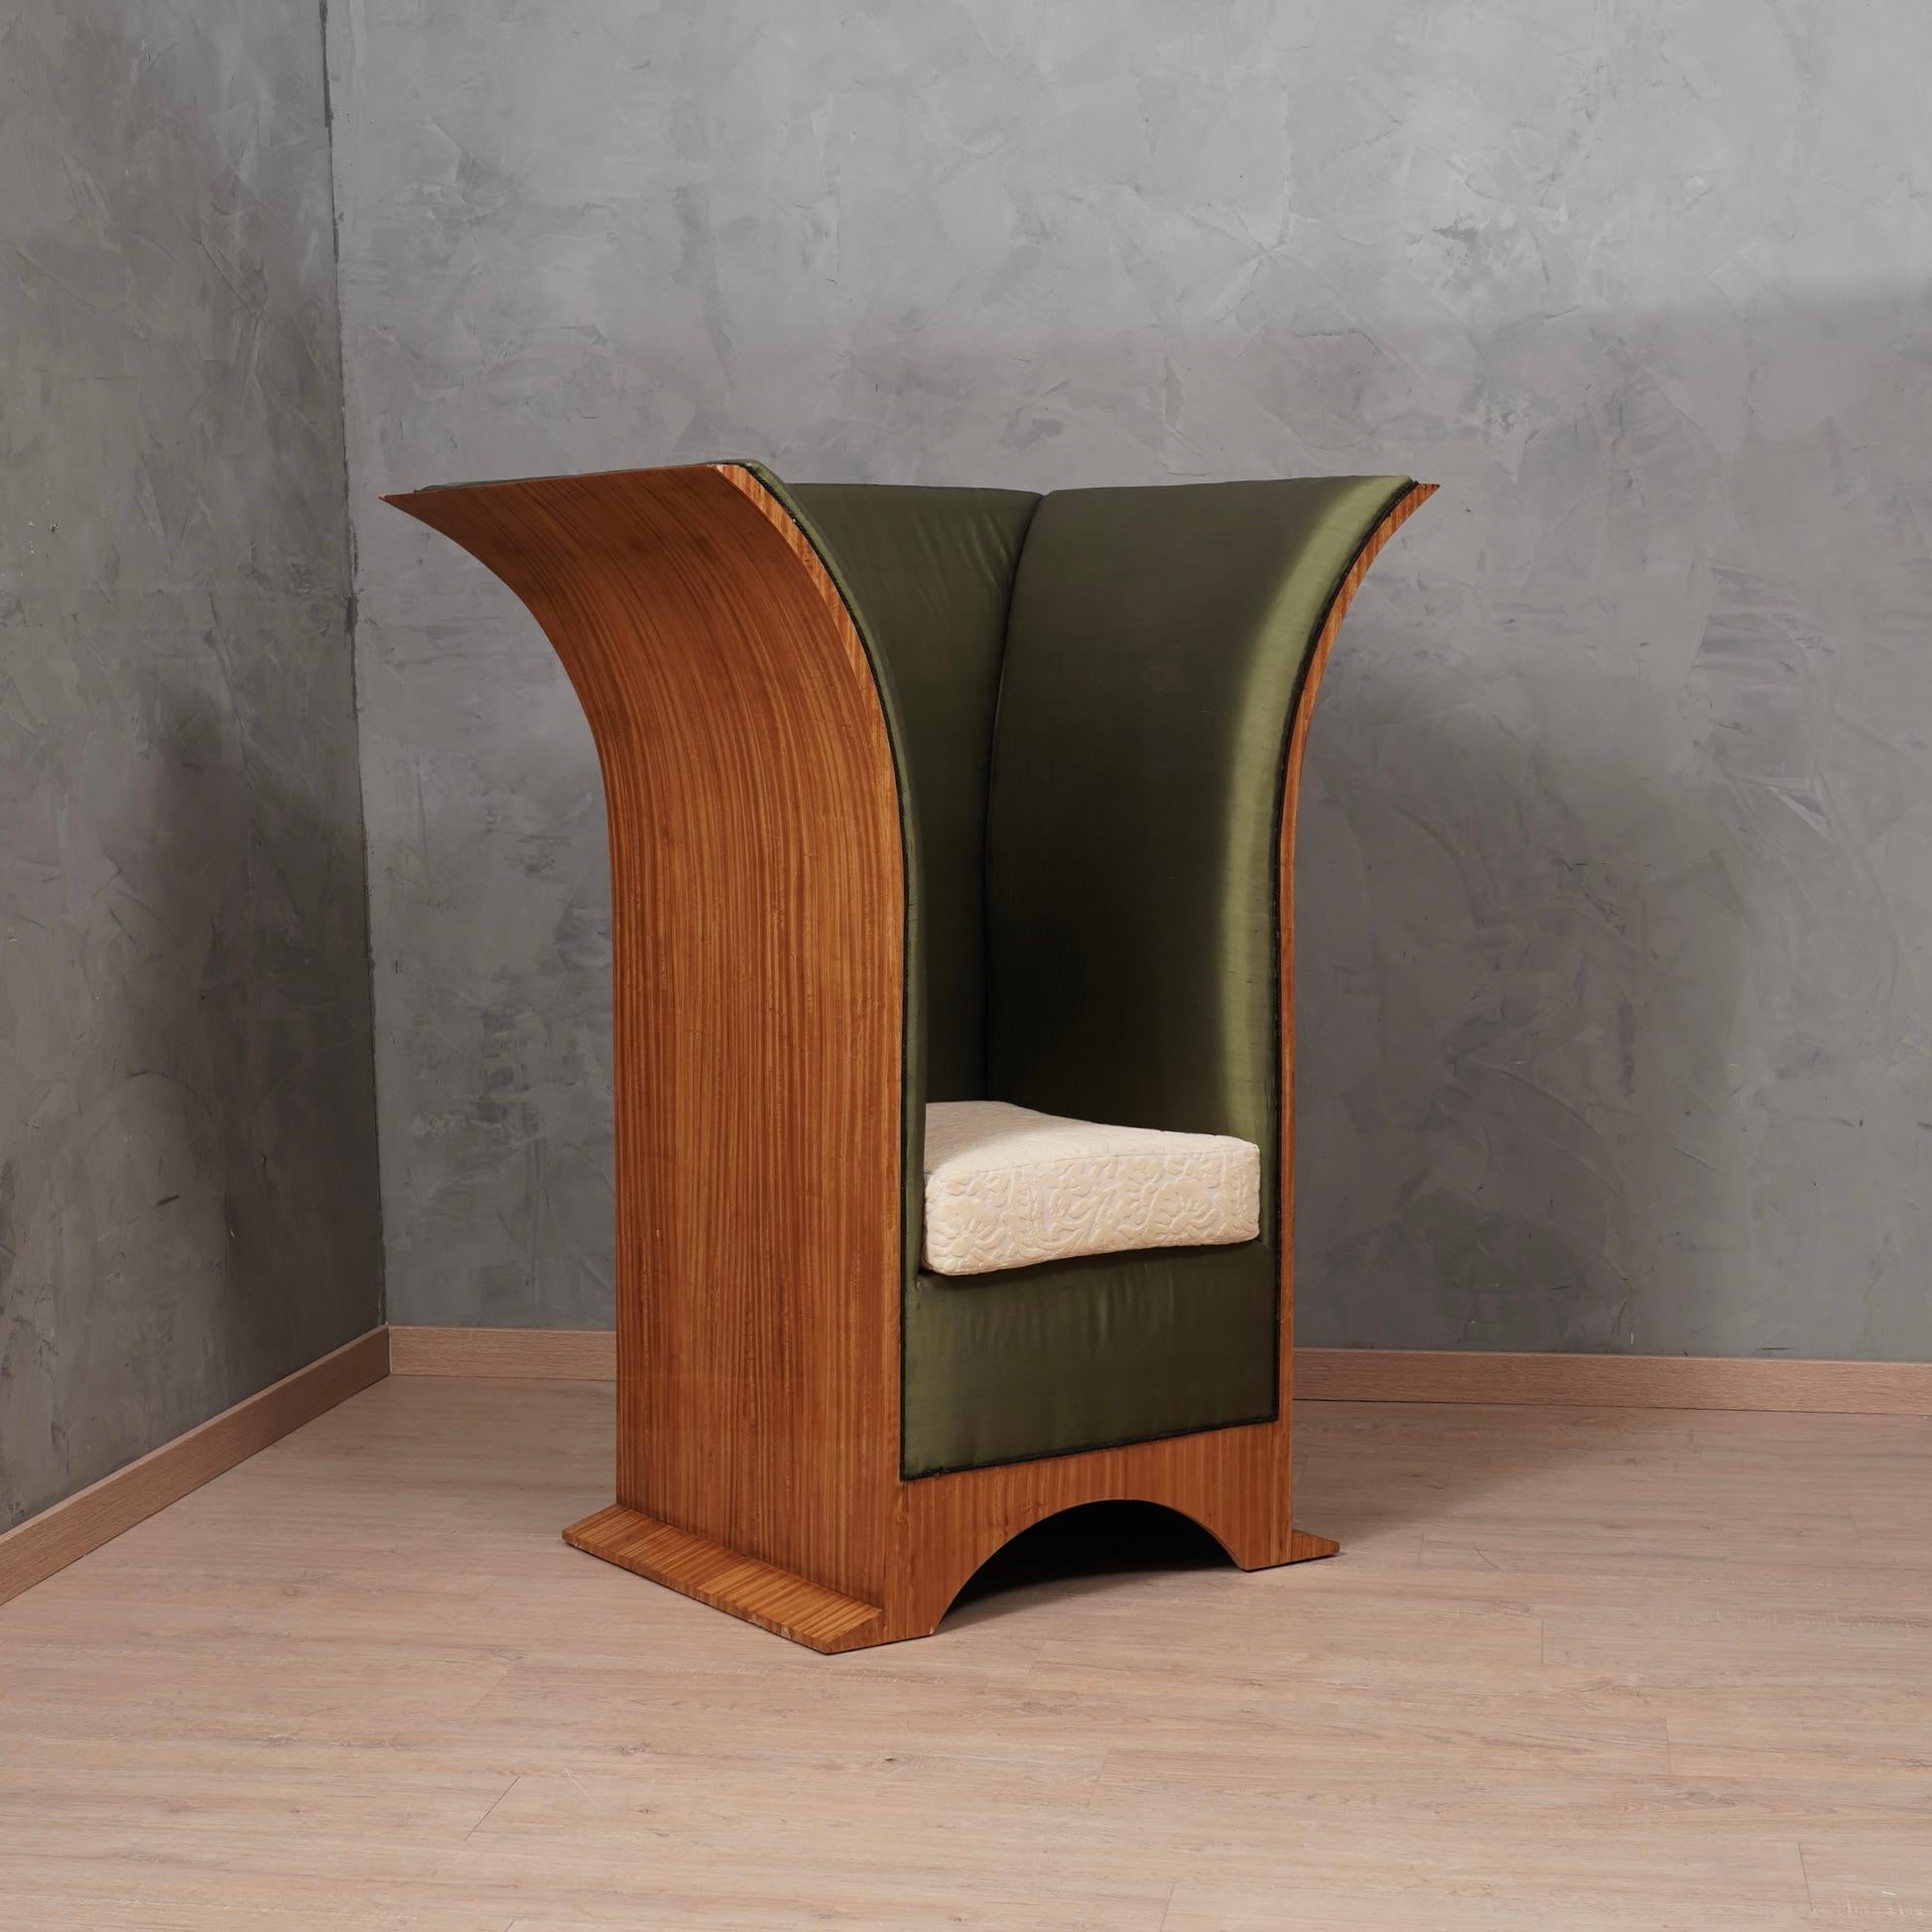 Comfortable and enveloping thrones. Extraordinary design for this pair of mid century armchairs.

All veneered in citronè wood, with green silk upholstery and white velvet cushion. Very special its design with a simple seat but two huge side